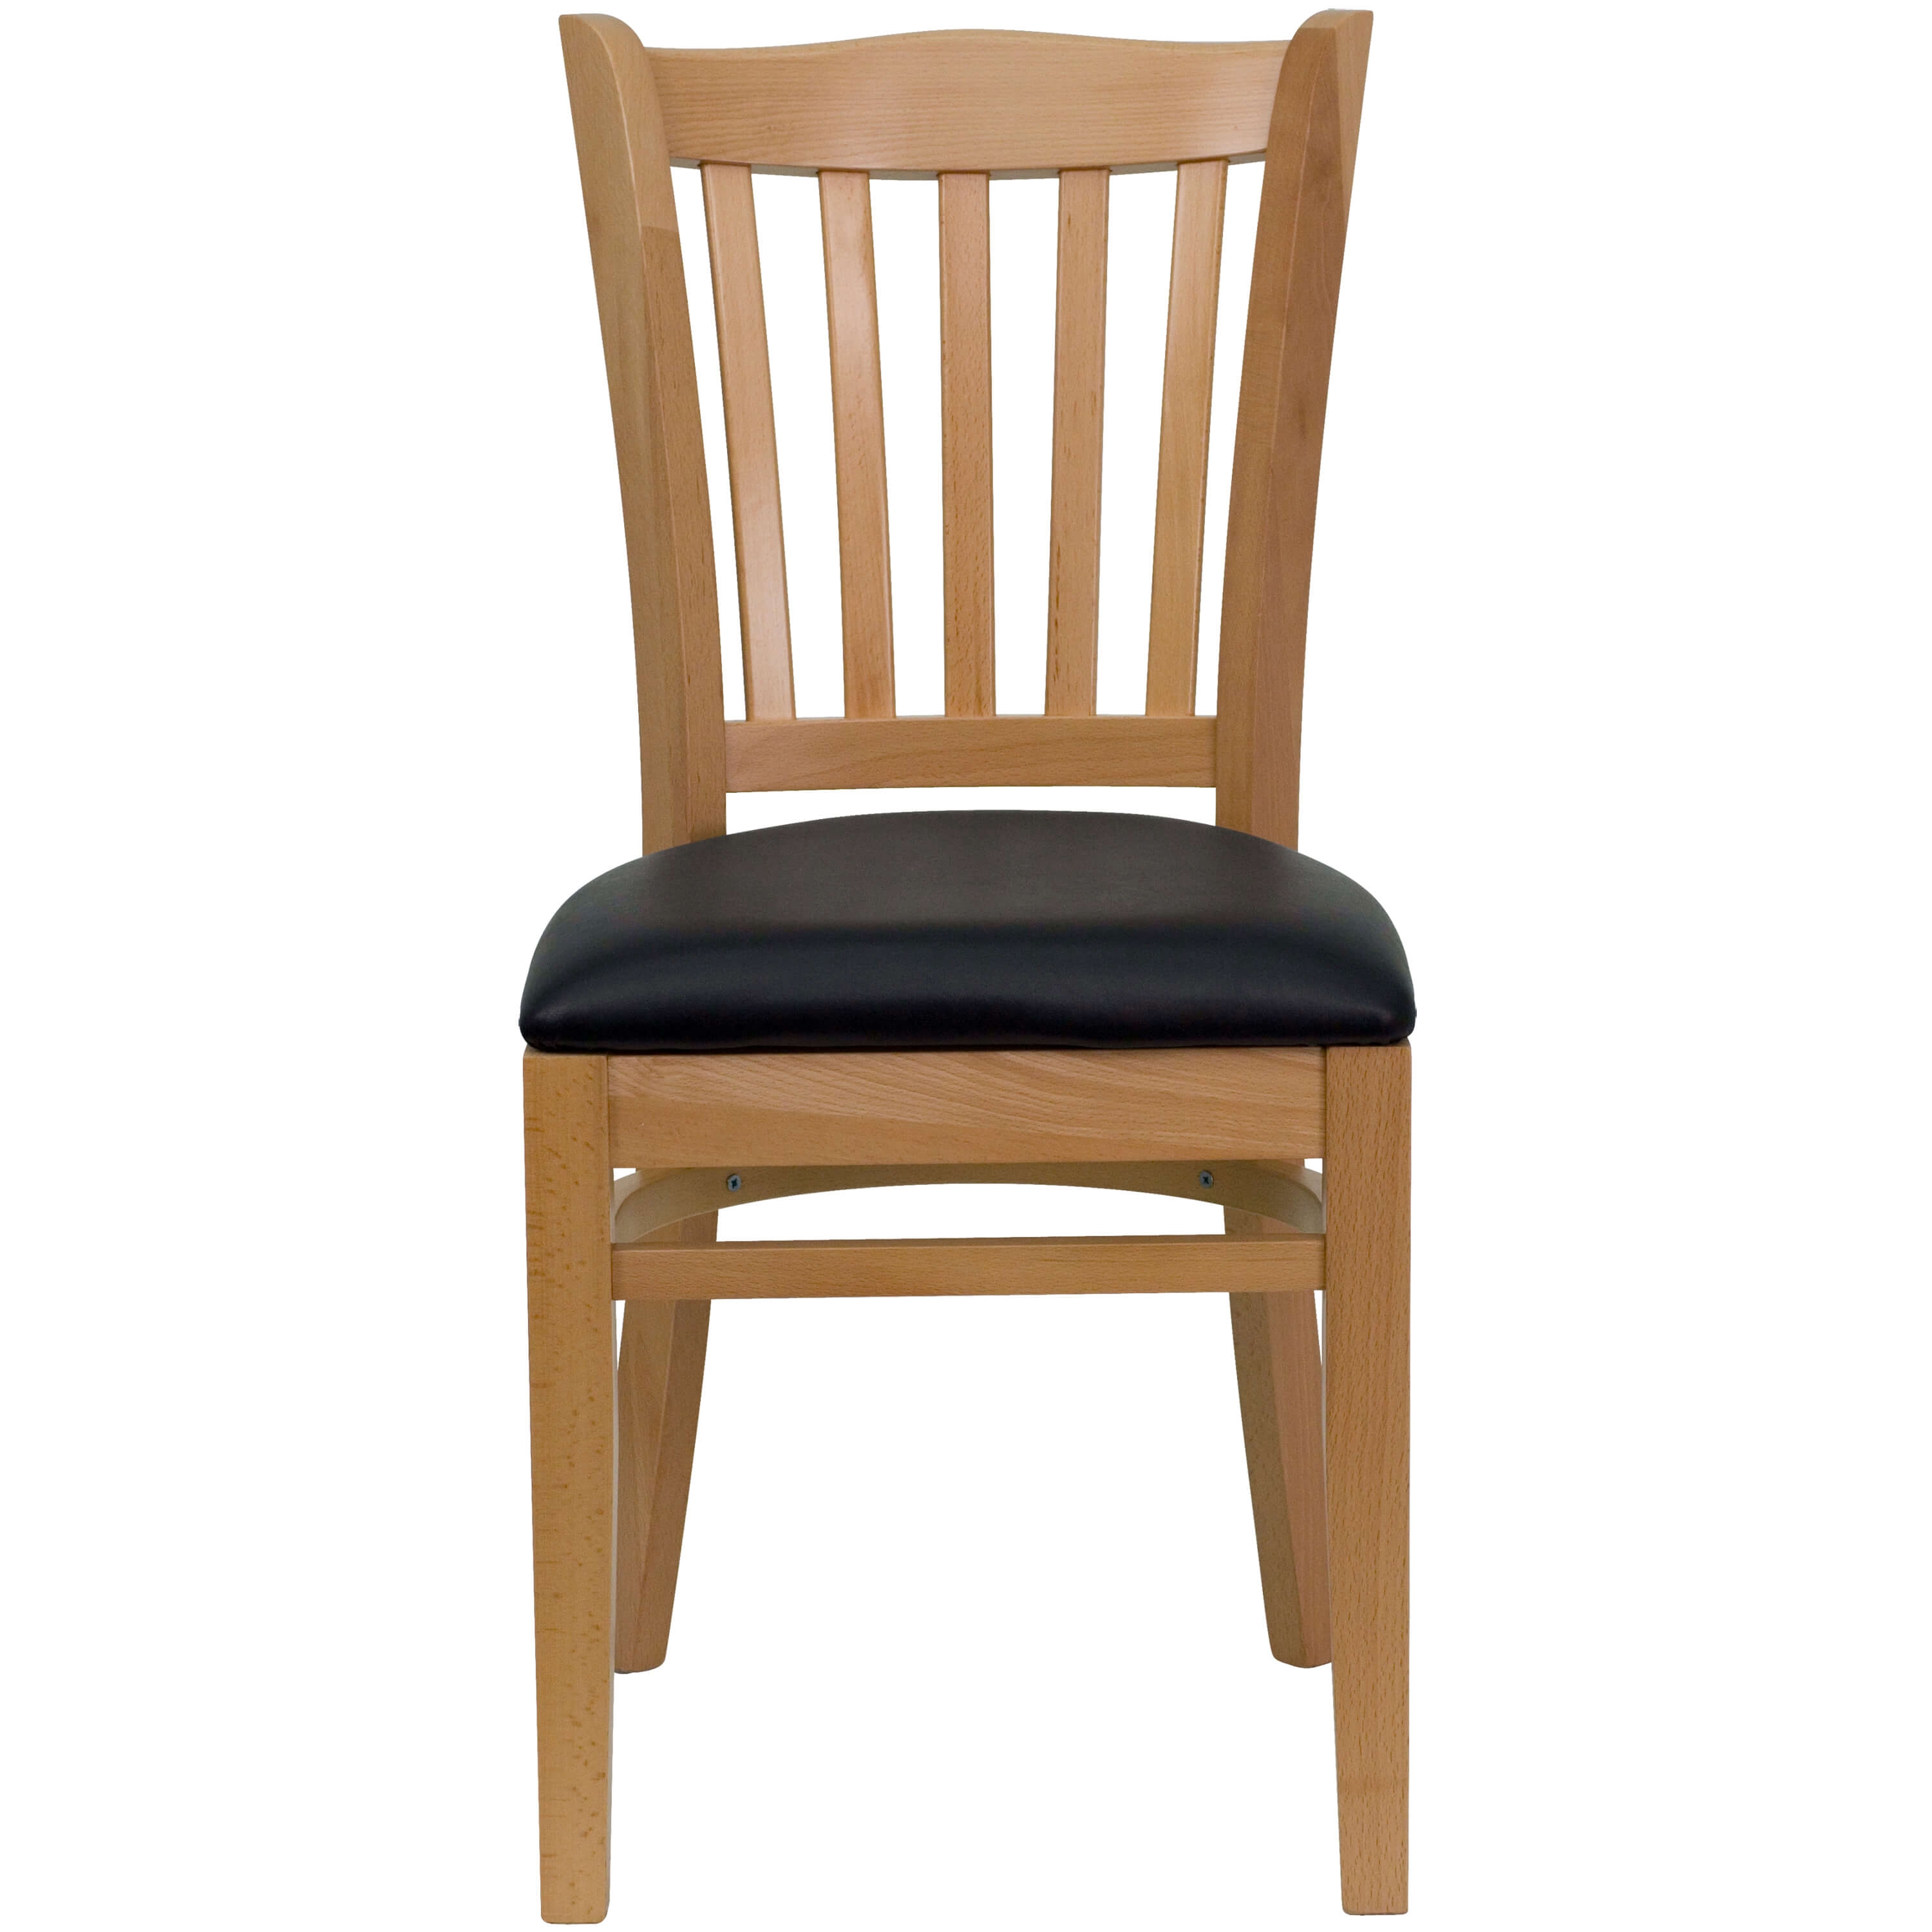 Vertical slat back chair front view